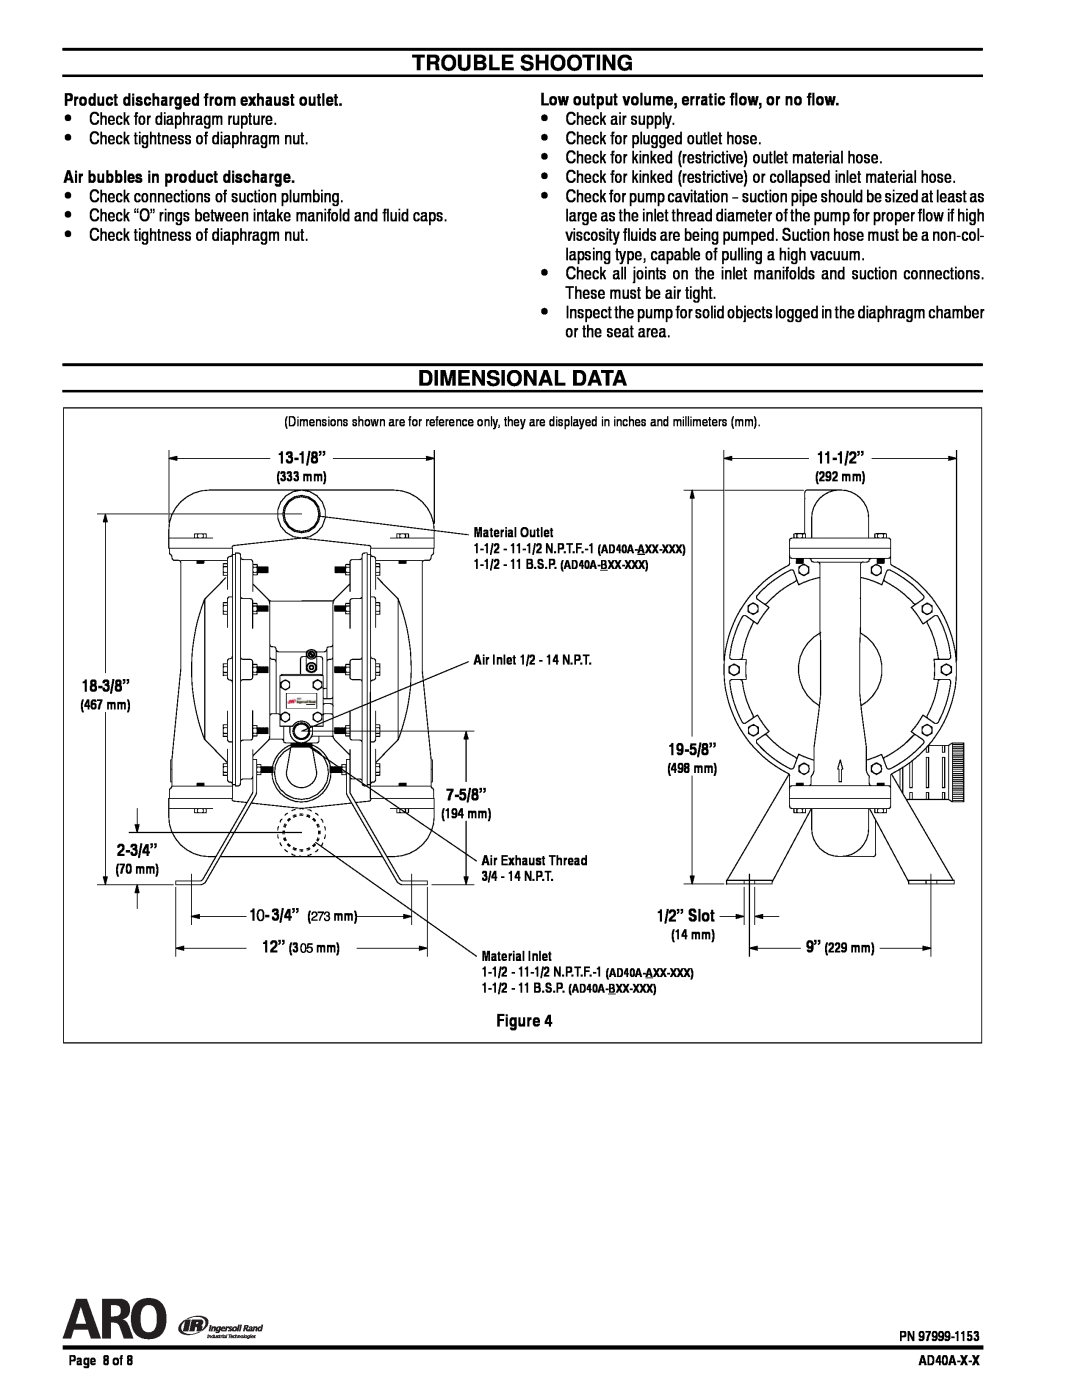 Ingersoll-Rand AD40A-X-X manual Trouble Shooting, Dimensional Data 